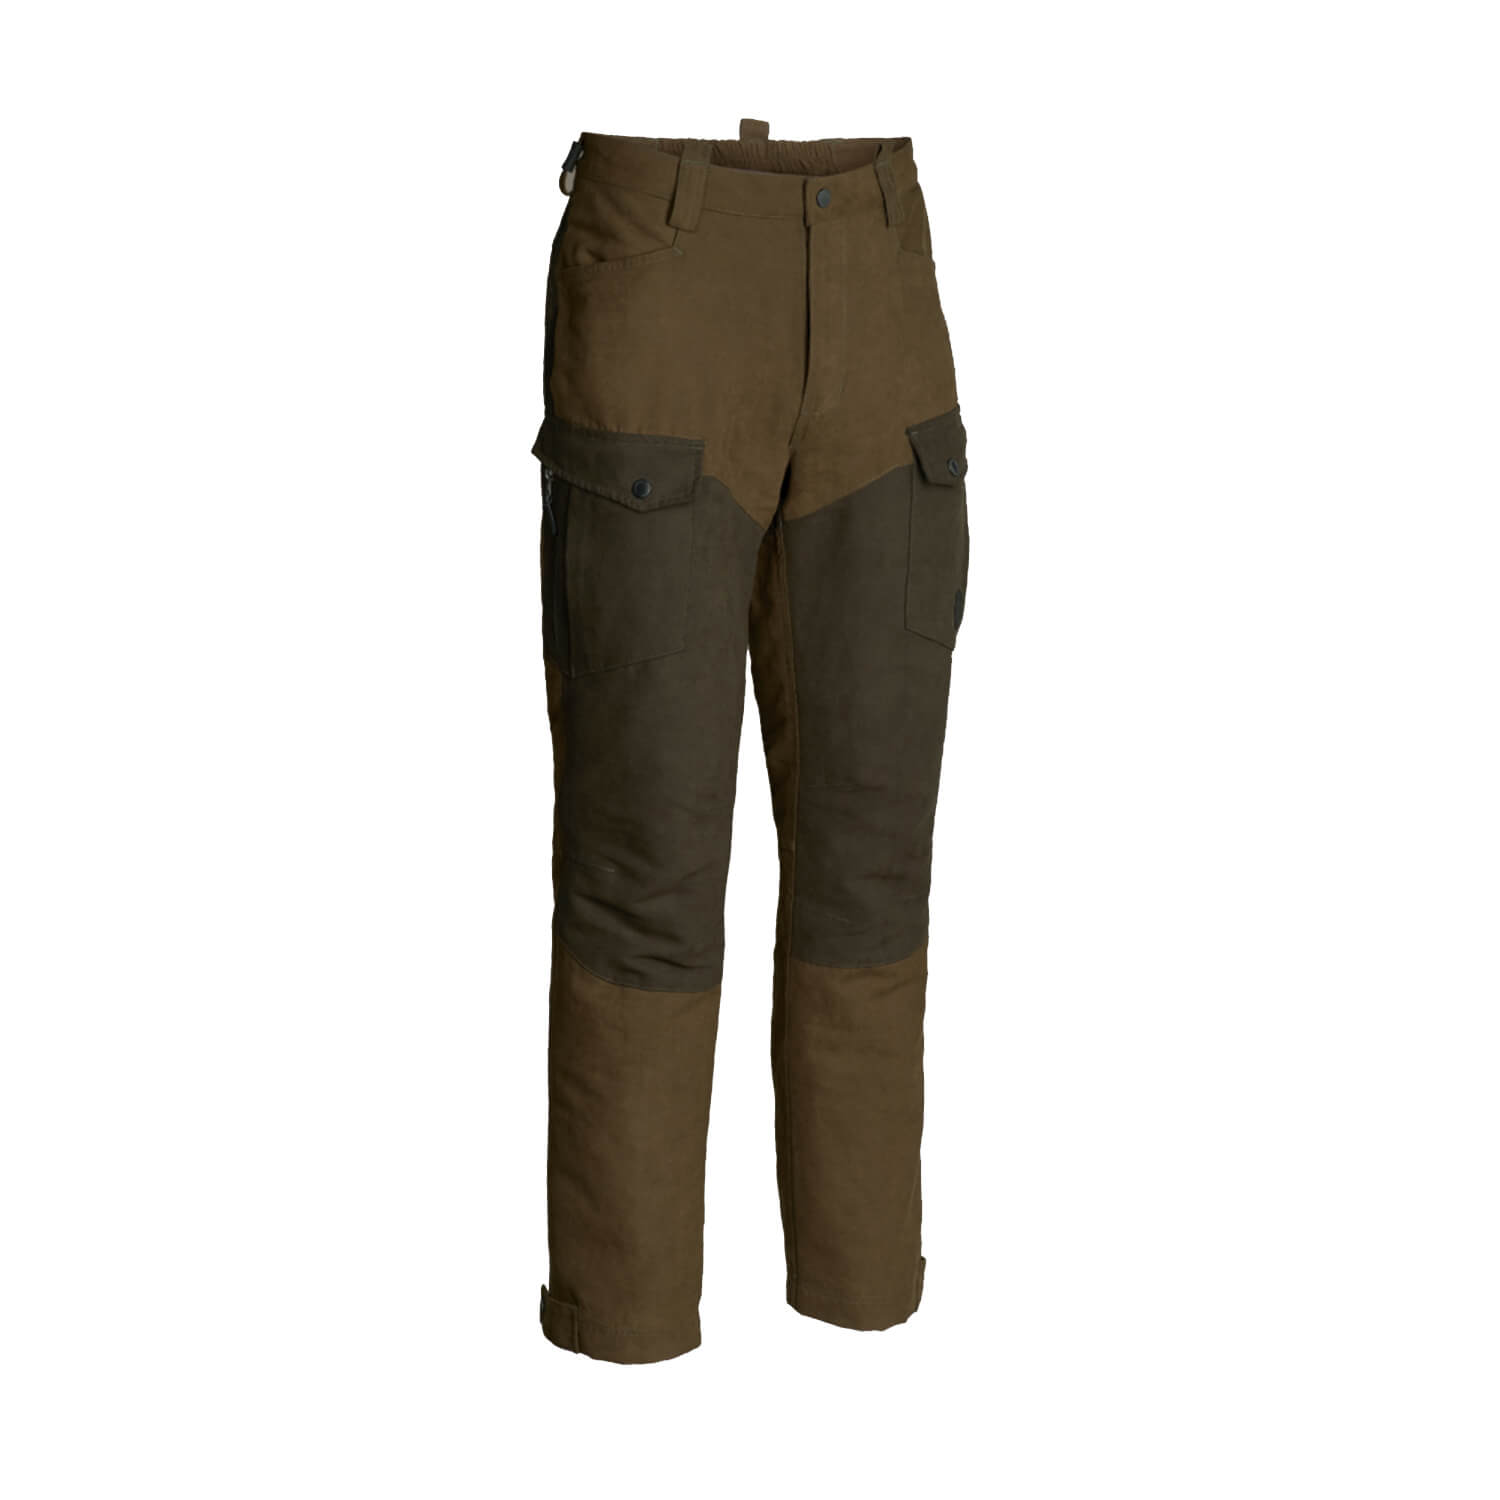 Northern Hunting hunting trousers Asmund Birk G2 - Hunting Trousers